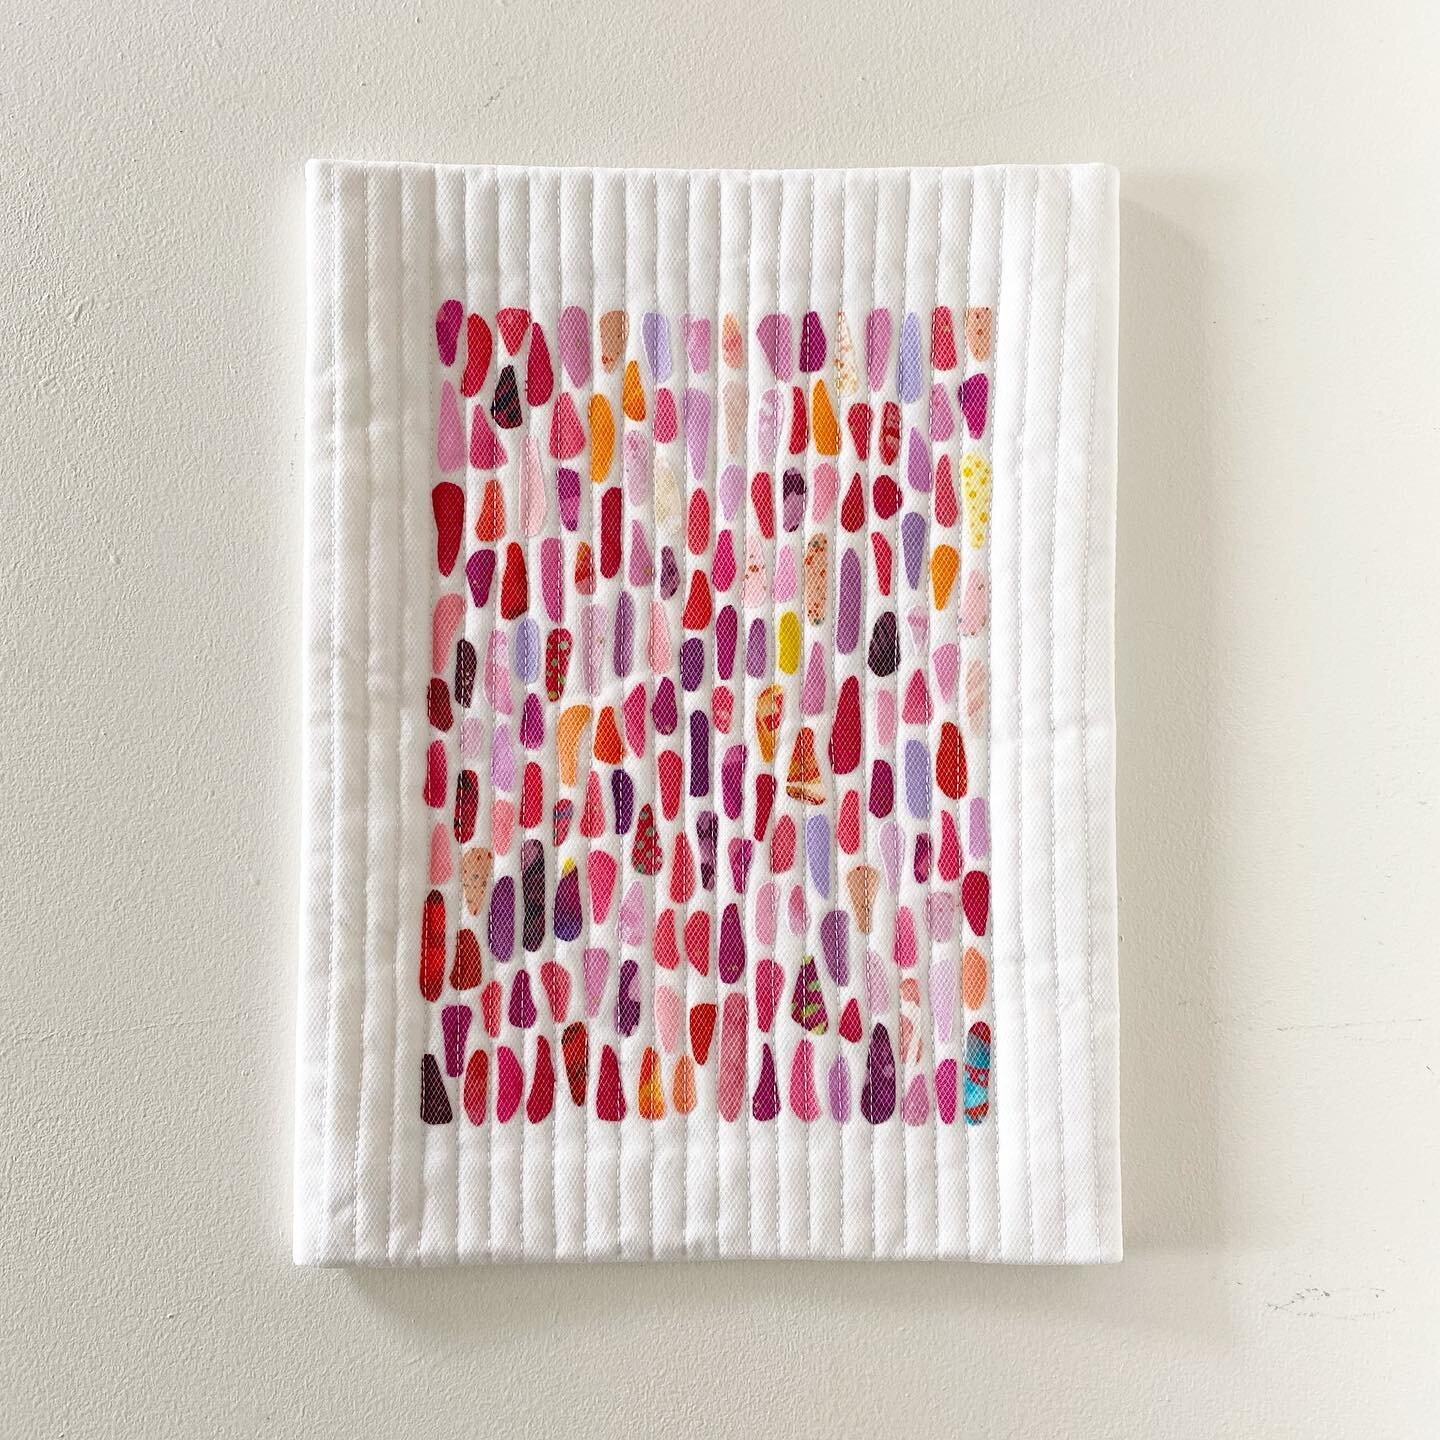 Micro Appliqu&eacute; No. 4⁣
8&rdquo; x 11&rdquo;⁣
⁣
🪸⁣
⁣
This is about as small as I go with appliqu&eacute;. Some of these pieces are 1/4 inch x 1/2 inch. This was made with scraps leftover from seaglass quilts (which are already made from scraps)